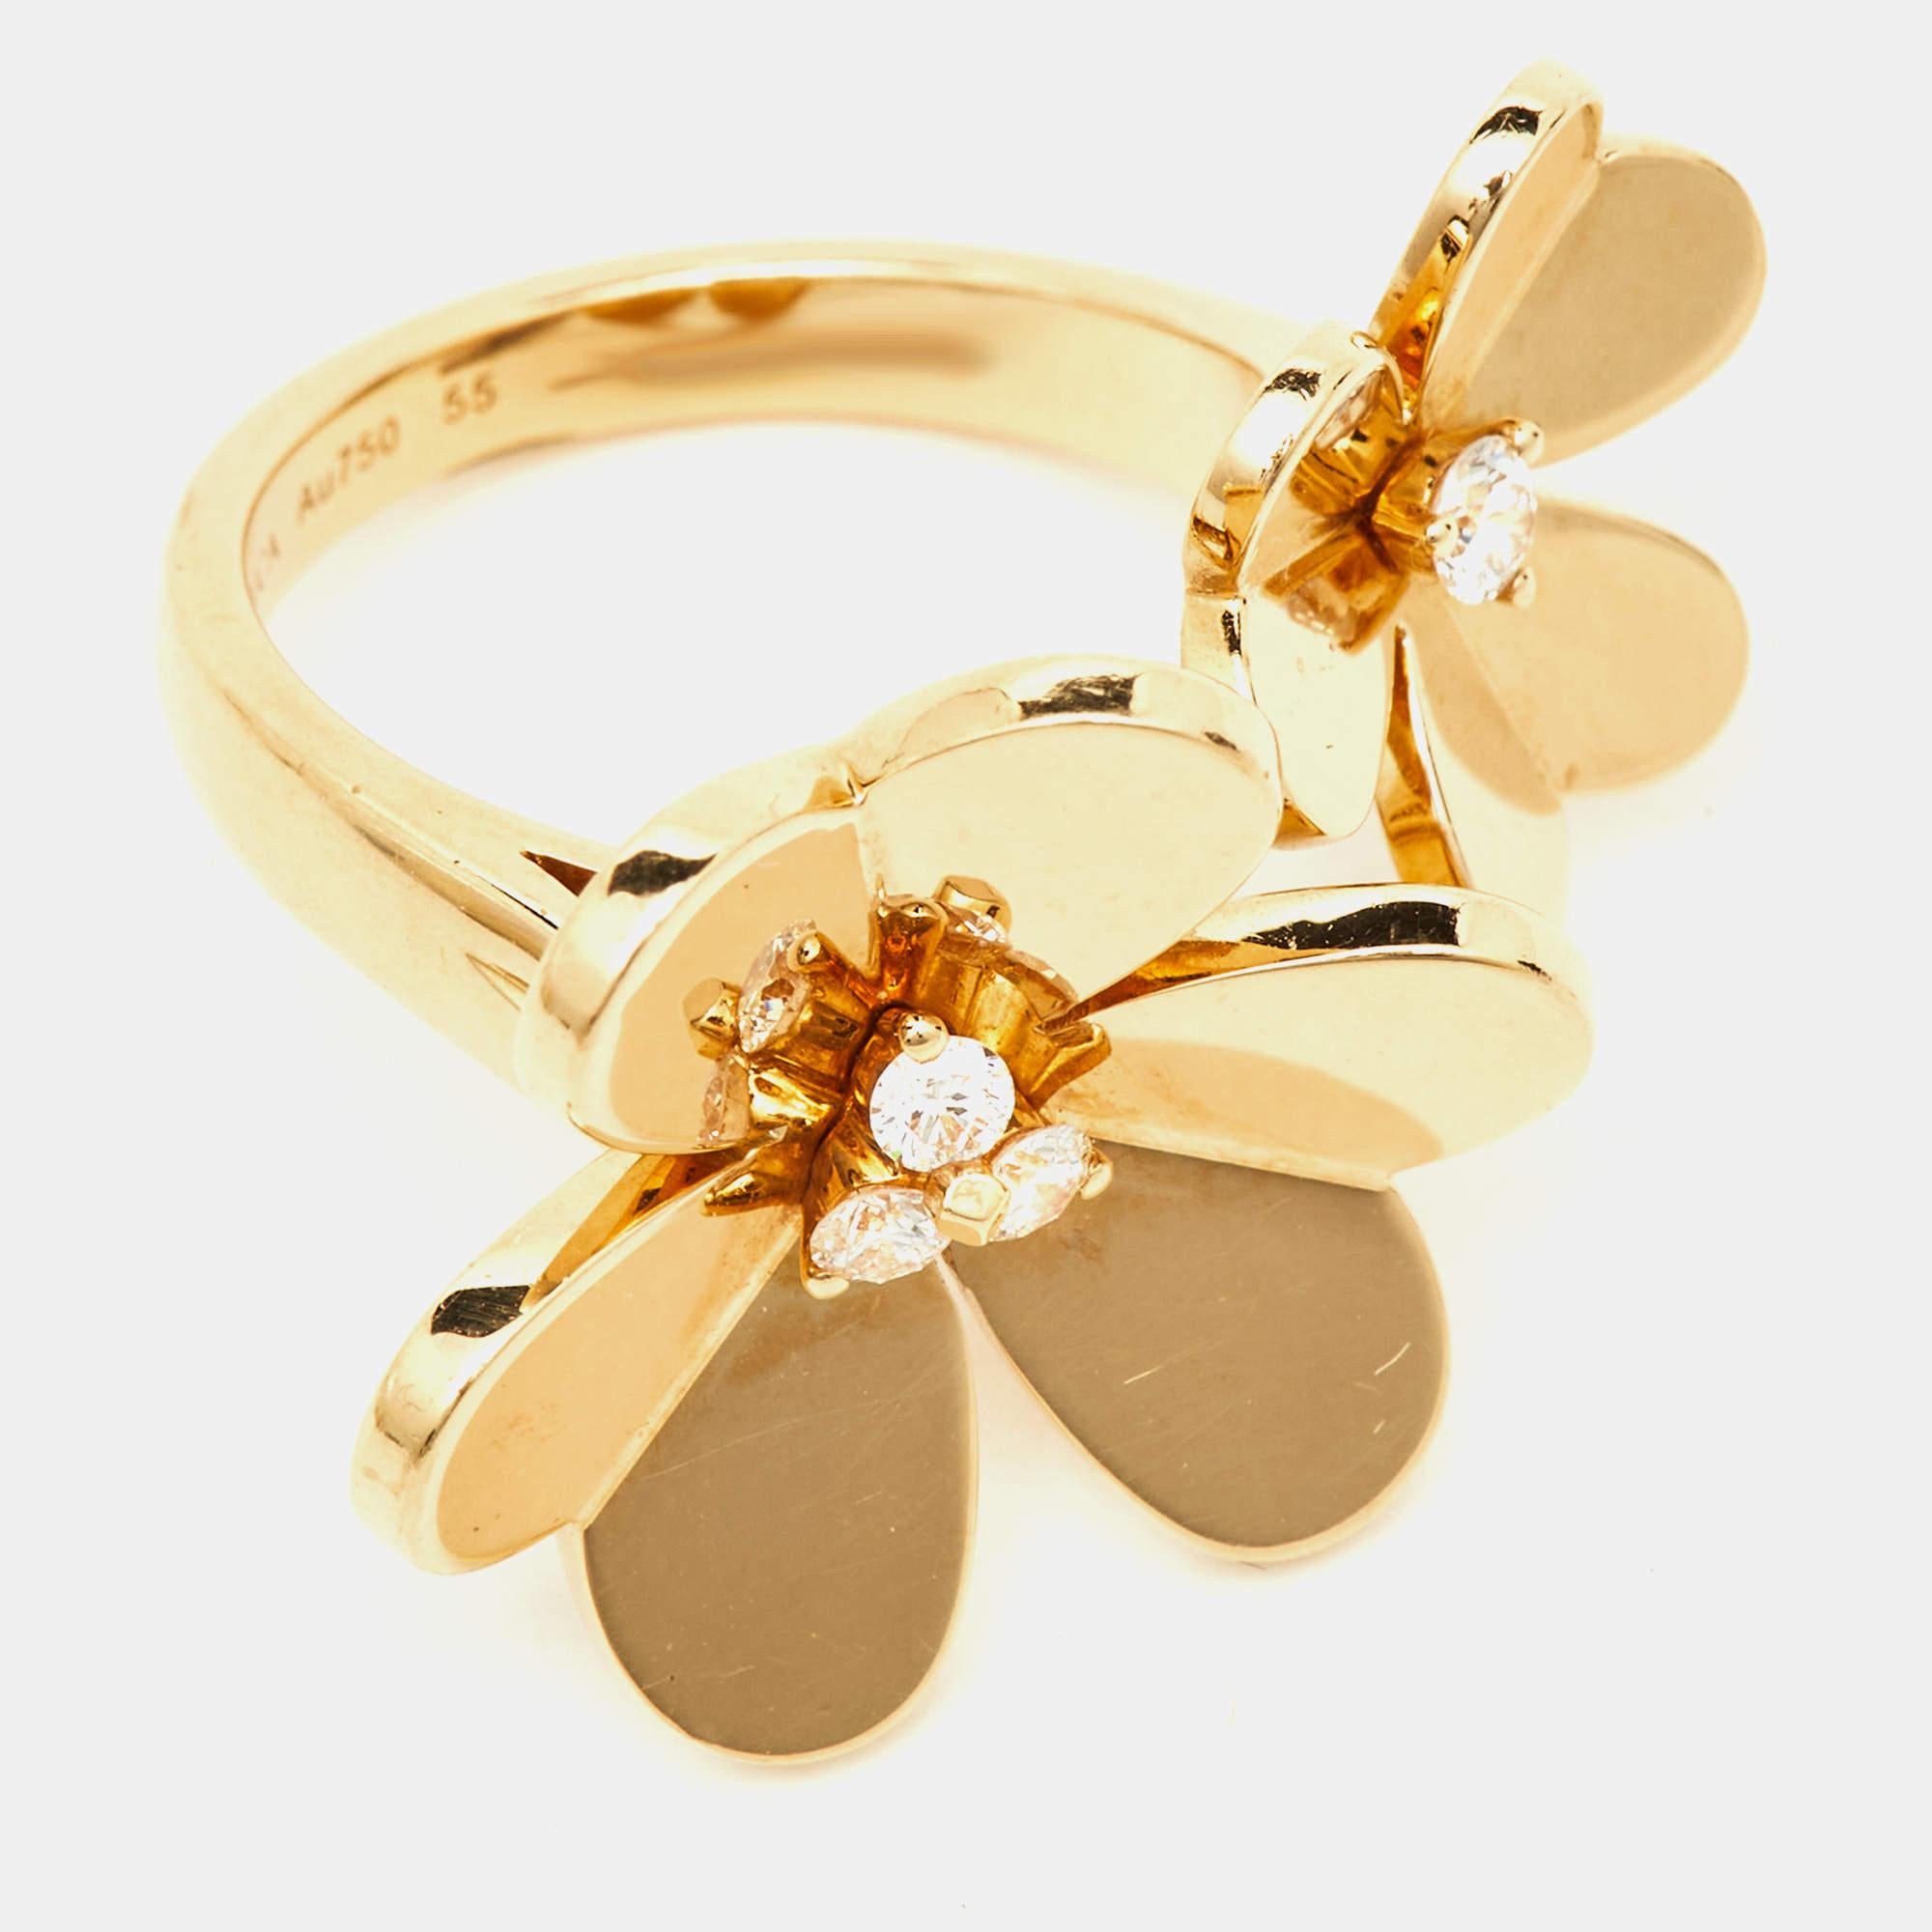 Frivole from Van Cleef & Arpels is a collection that lays out the label's deft craftsmanship and genius of crafting unique jewelry pieces. Dignified and delicate, creations from this line, embodying the glow and luster of florals, appeal to your